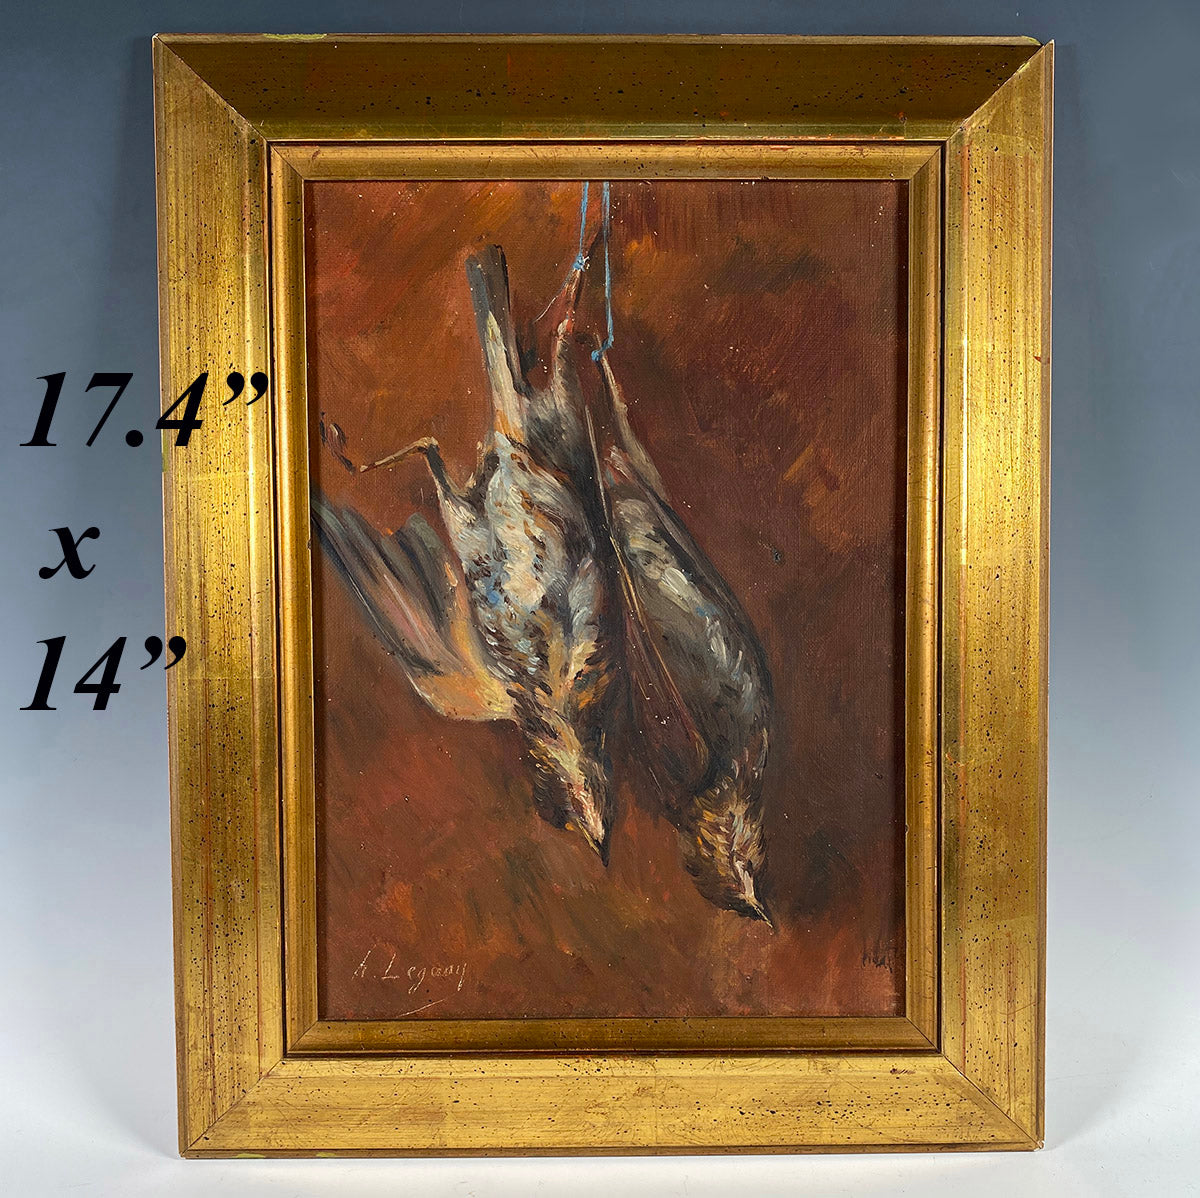 Vintage French Impressionist Oil Painting, Nature Mort or Still Life with Birds 17.5" x 14"